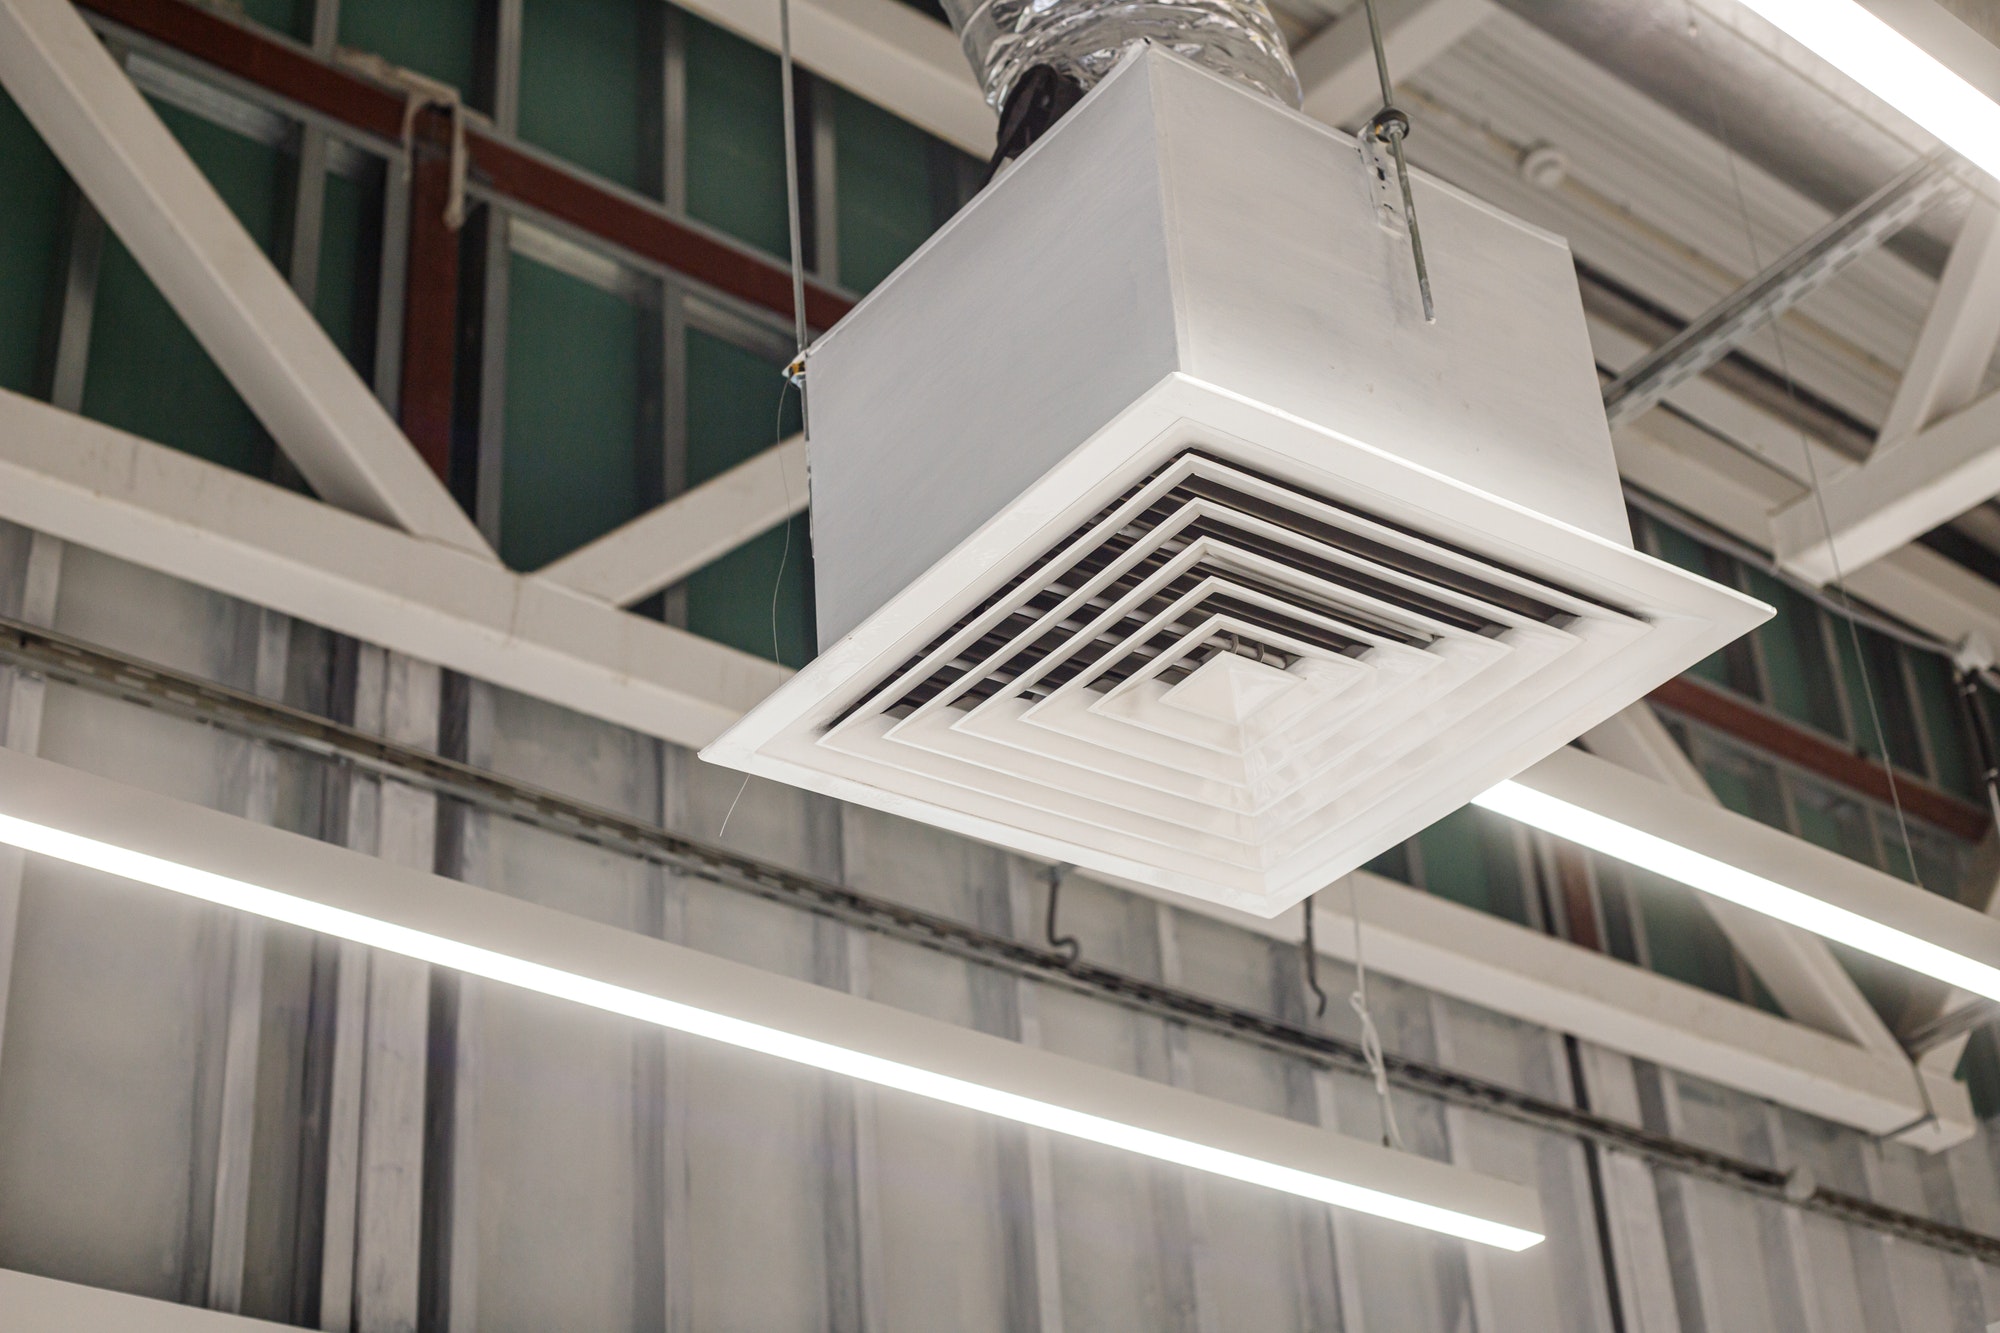 Square grid with supply ventilation duct in commercial building. Industrial ventilation system